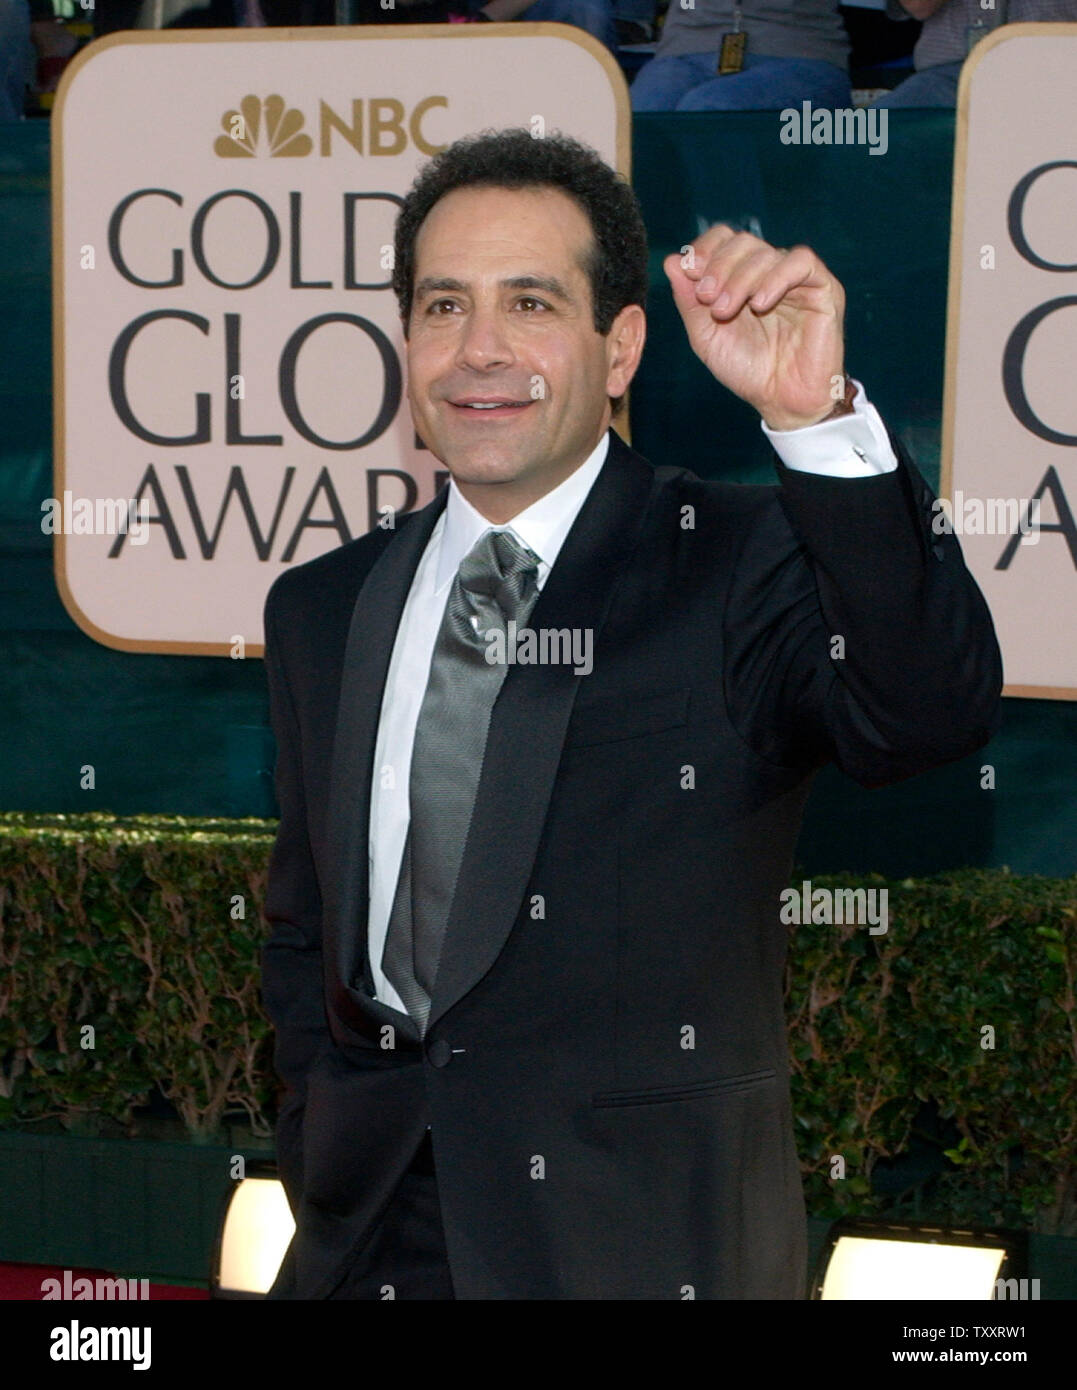 Tony Shalhoub, nominated for best actor in a musical or comedy series for his work on 'Monk, arrives for the 62nd annual Golden Globe Awards in Beverly Hills, California on January 16, 2005.   (UPI Photo/Jim Ruymen) Stock Photo